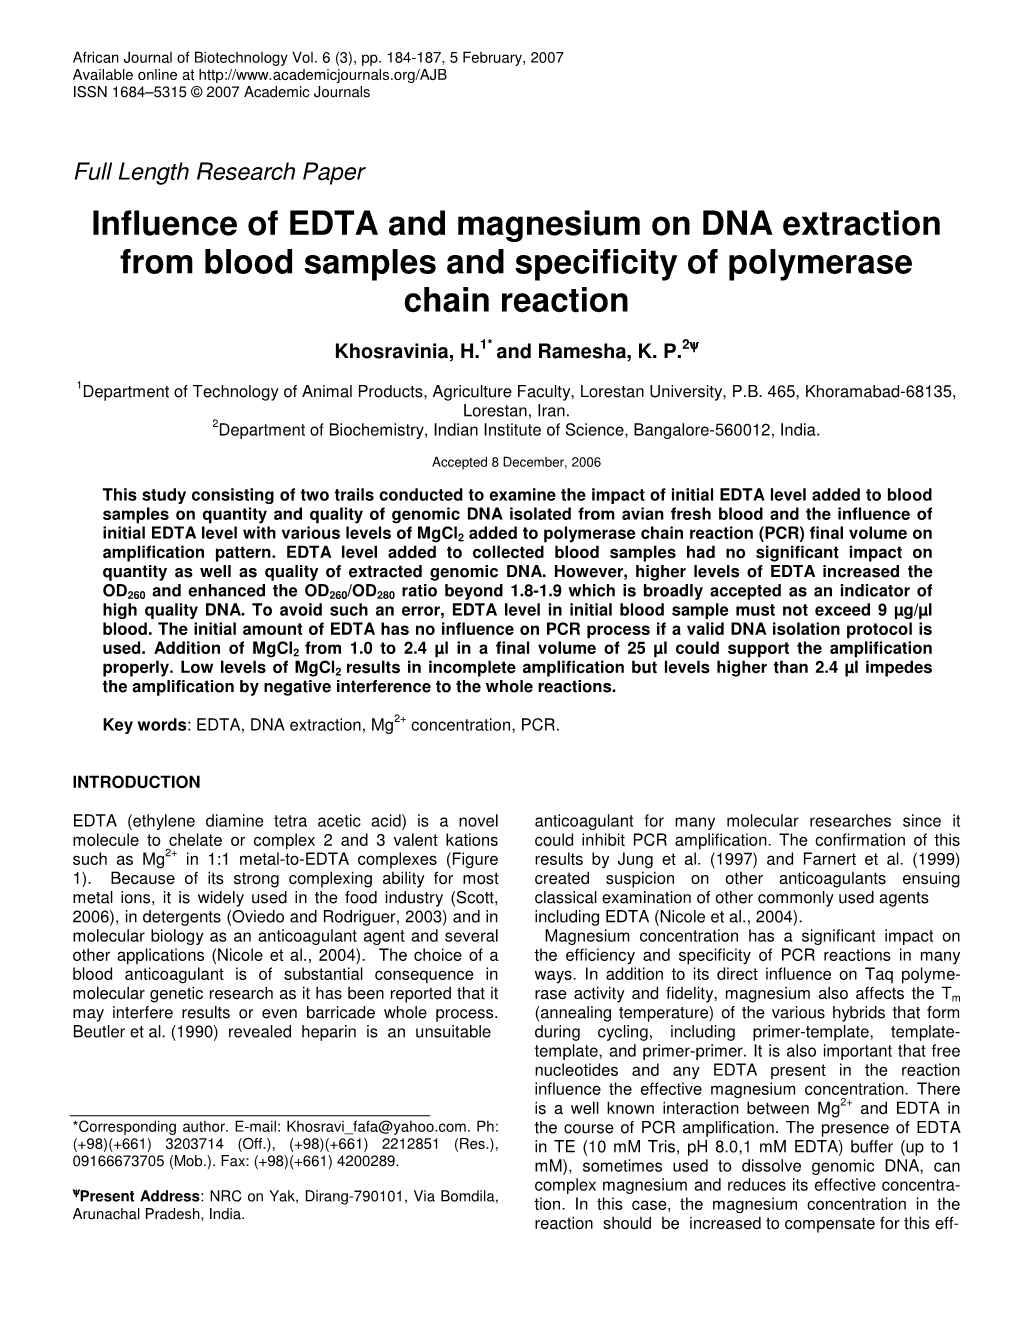 Influence of EDTA and Magnesium on DNA Extraction from Blood Samples and Specificity of Polymerase Chain Reaction